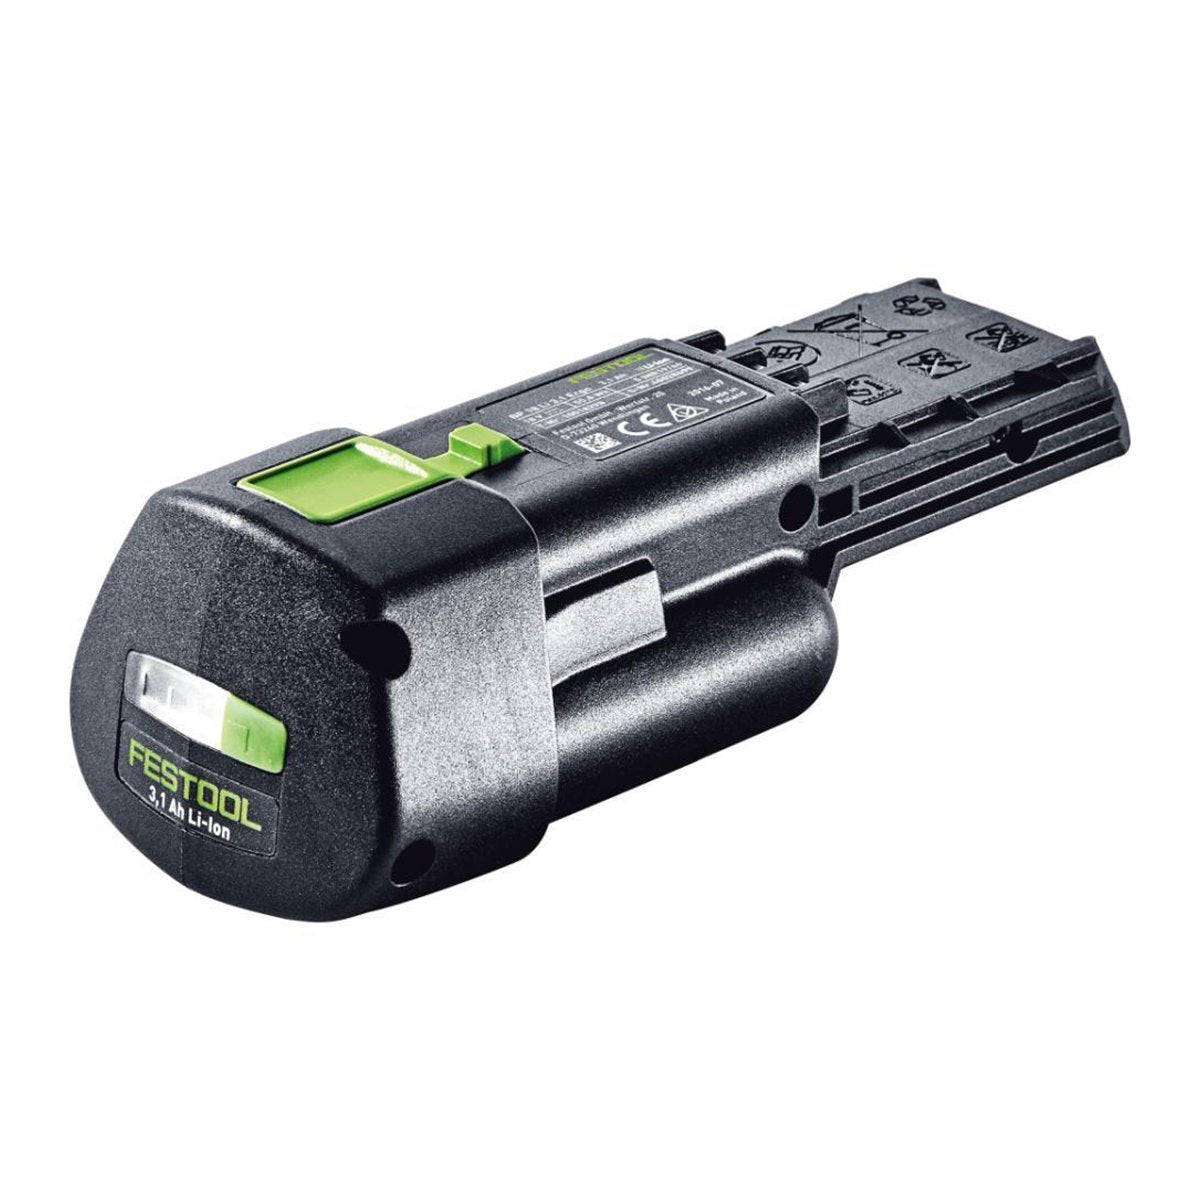 The Ergo 3.1 Ah Li-ion 18 volt battery showing charge indicator with switch, release button and lock, and shape of battery.